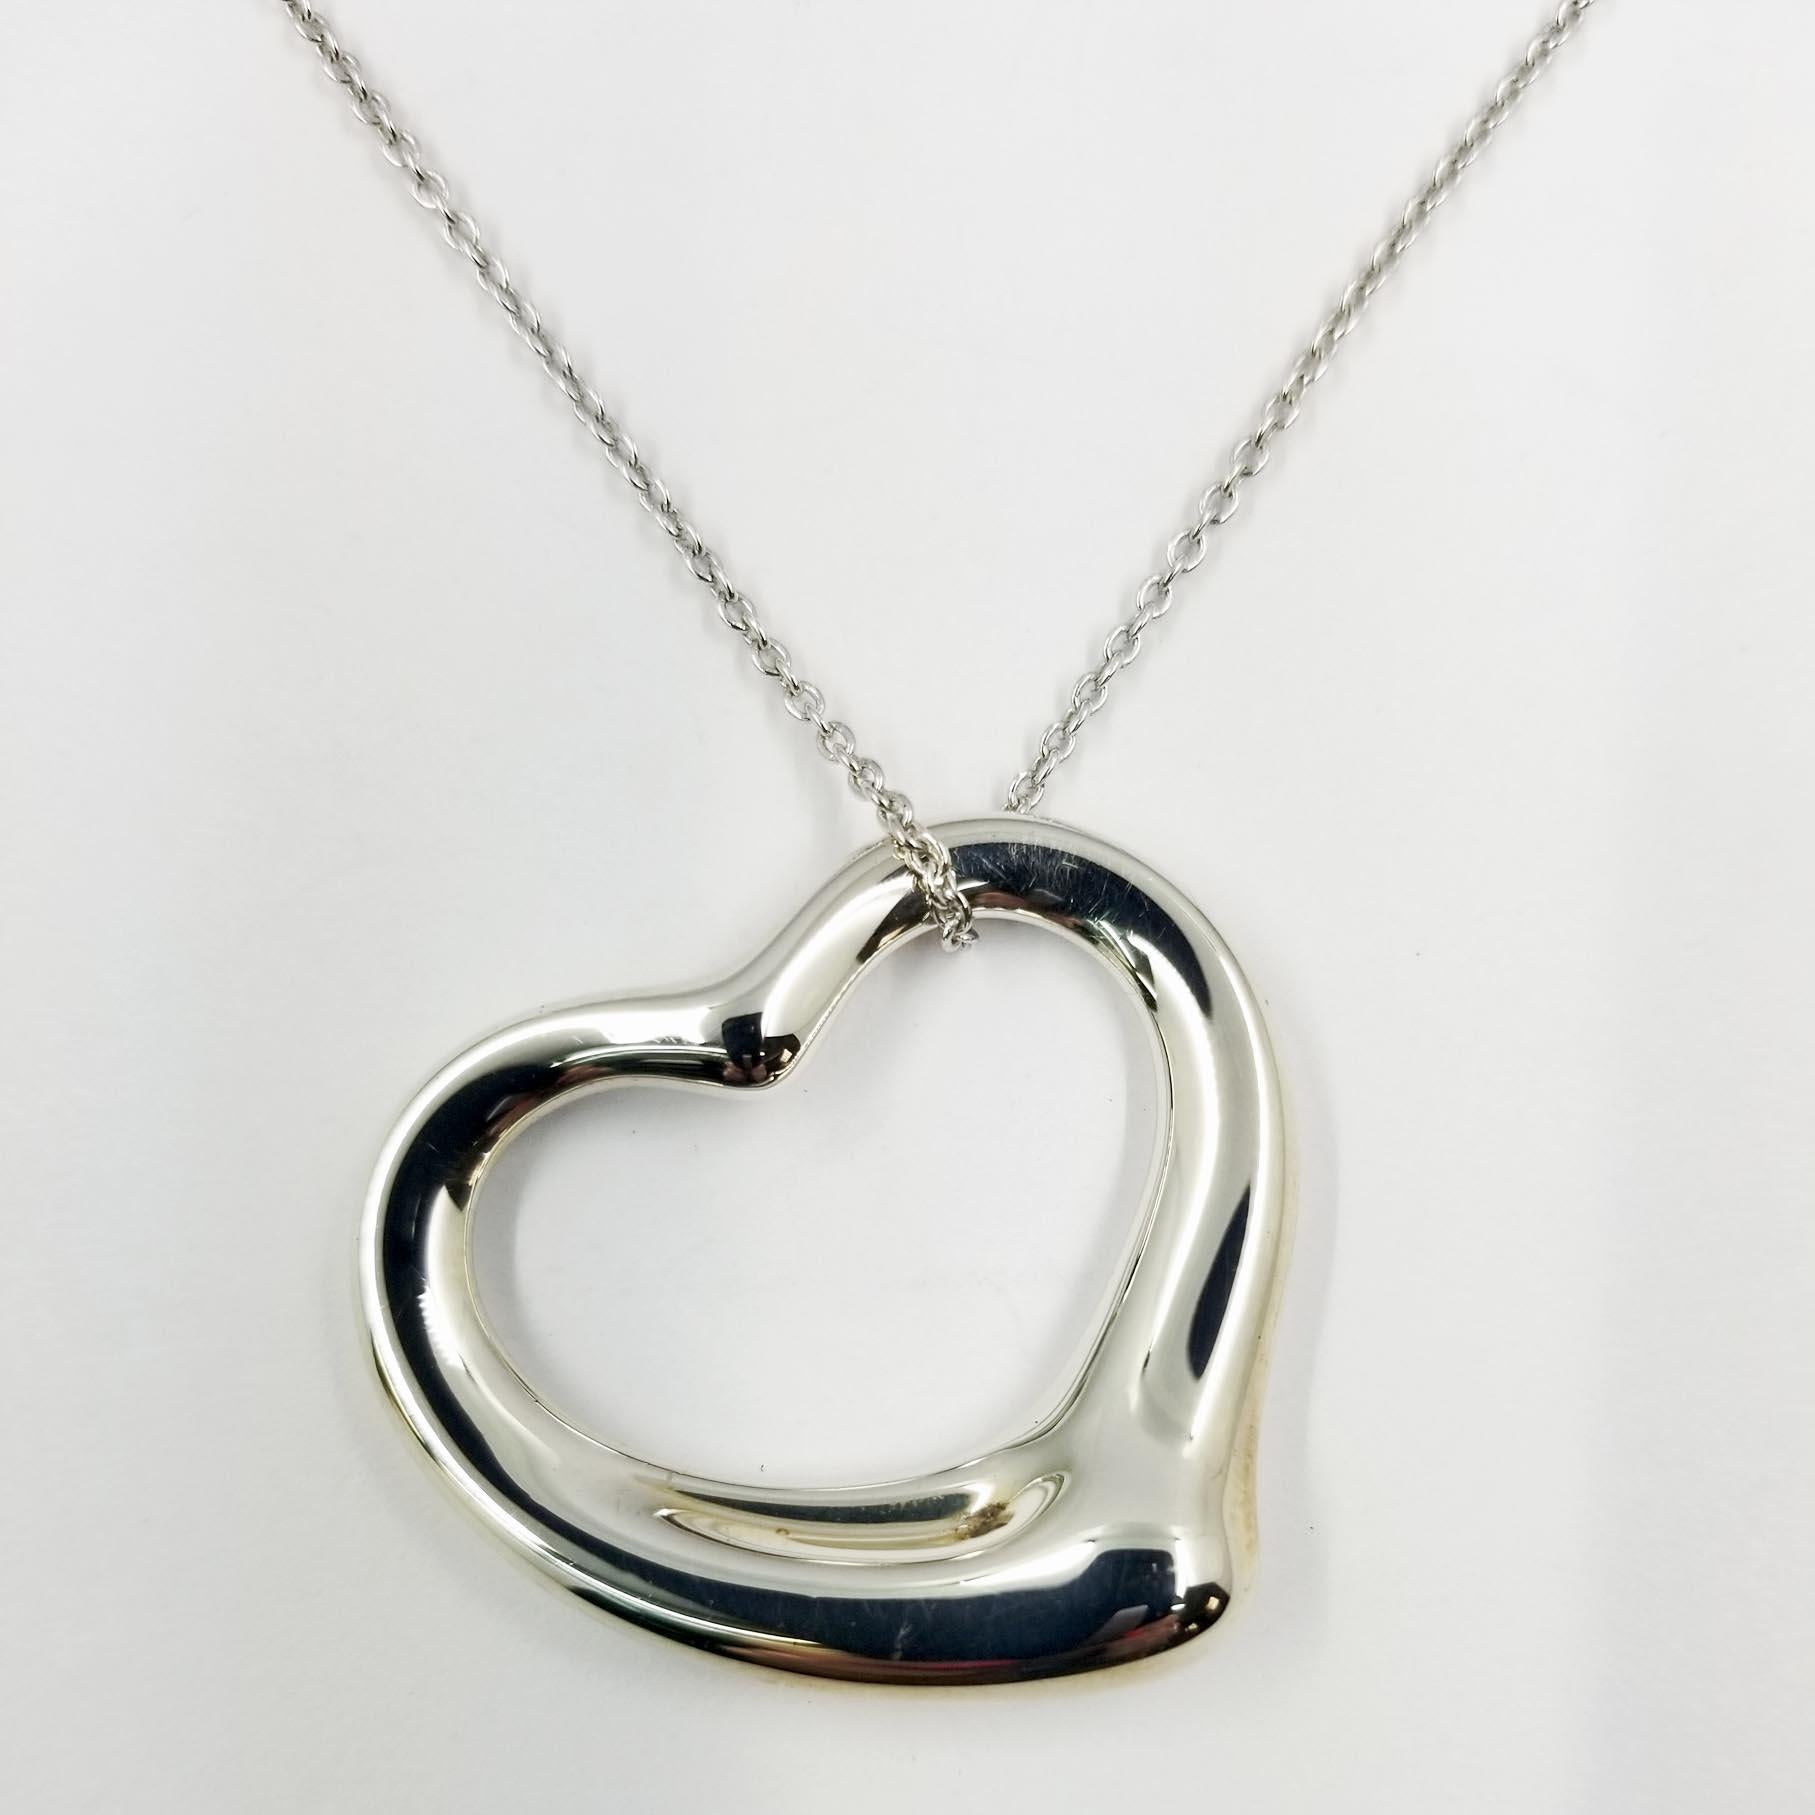 This playful sterling silver heart pendant was designed for Tiffany & Co by Elsa Peretti. The back of the curved heart is engraved Tiffany & Co. with Elsa Peretti's signature, 925, and Spain. The signed pendant is on a non-branded 16 inch sterling